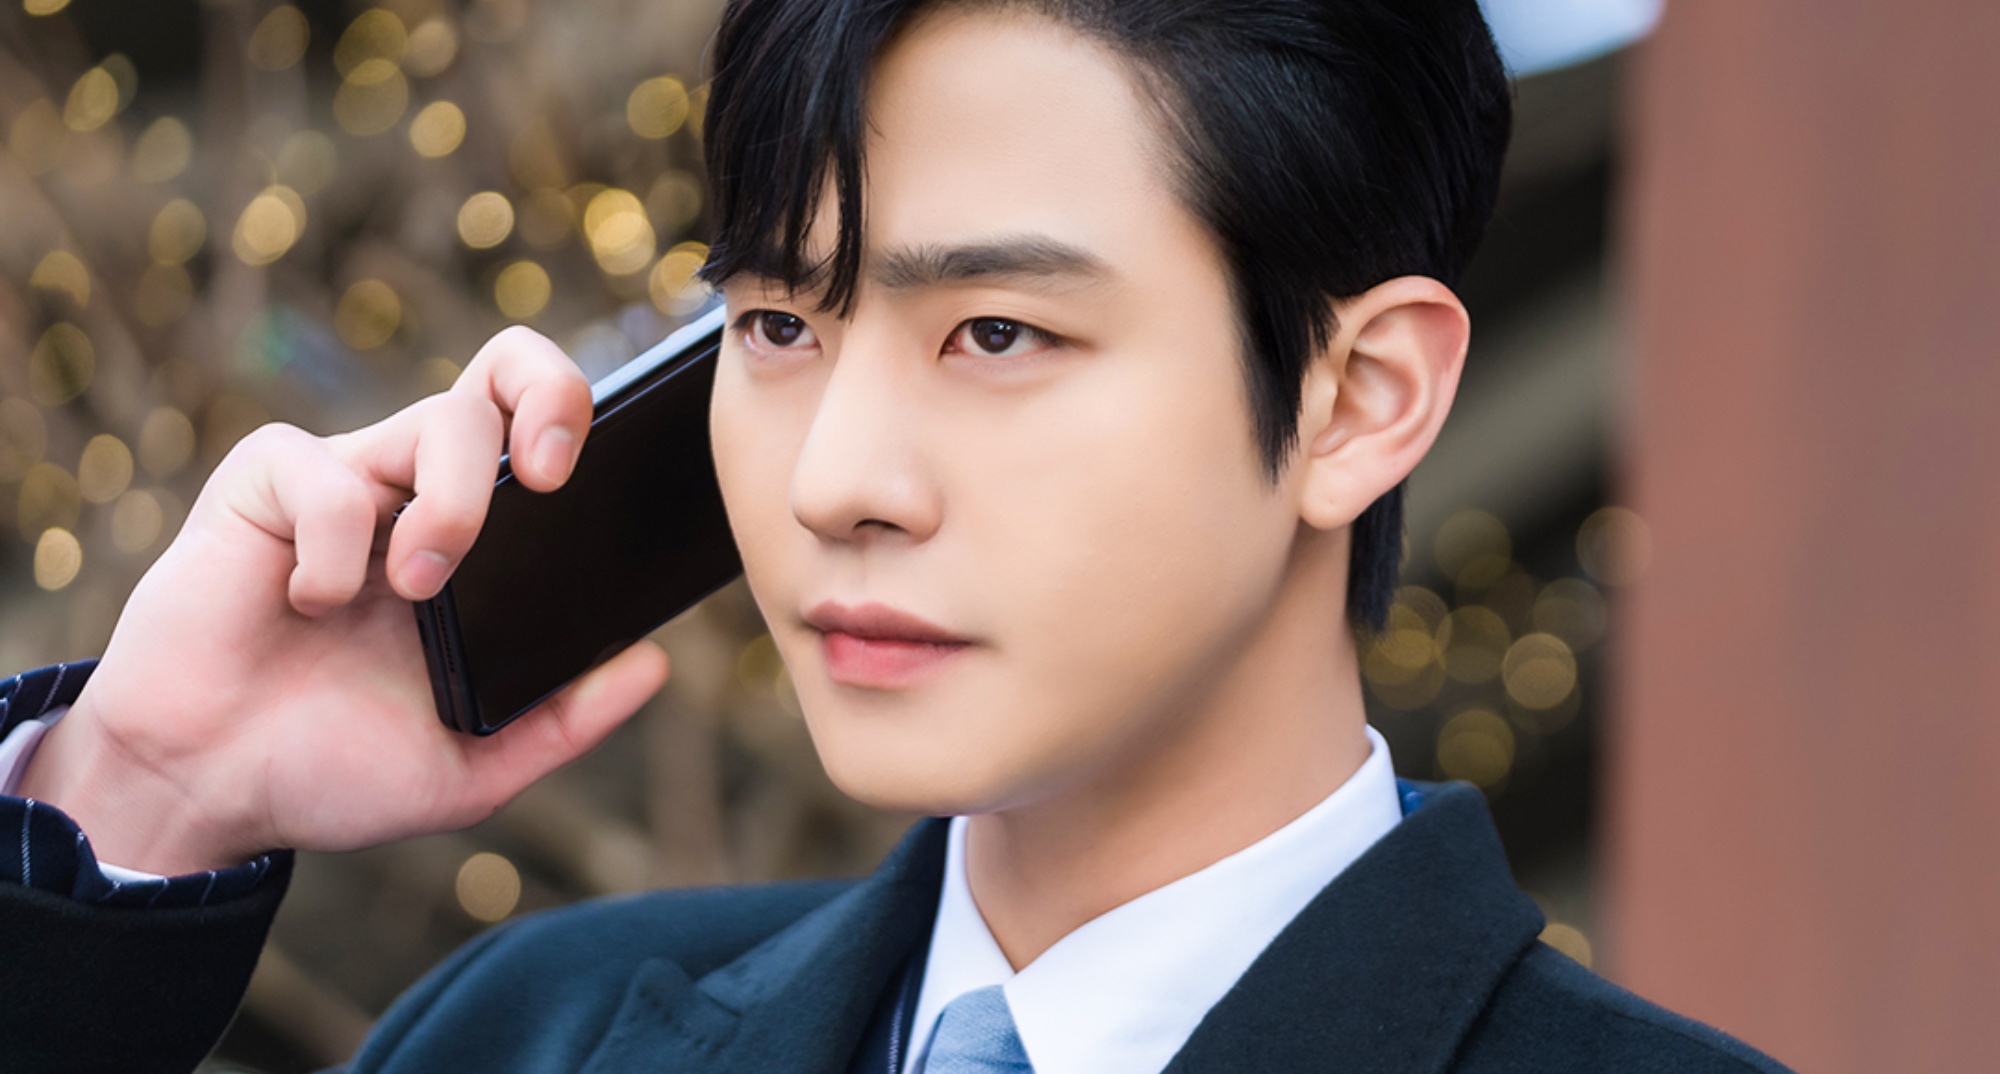 Ahn Hyo-seop as Tae-mu in 'Business Proposal' using a cellphone and wearing suit.